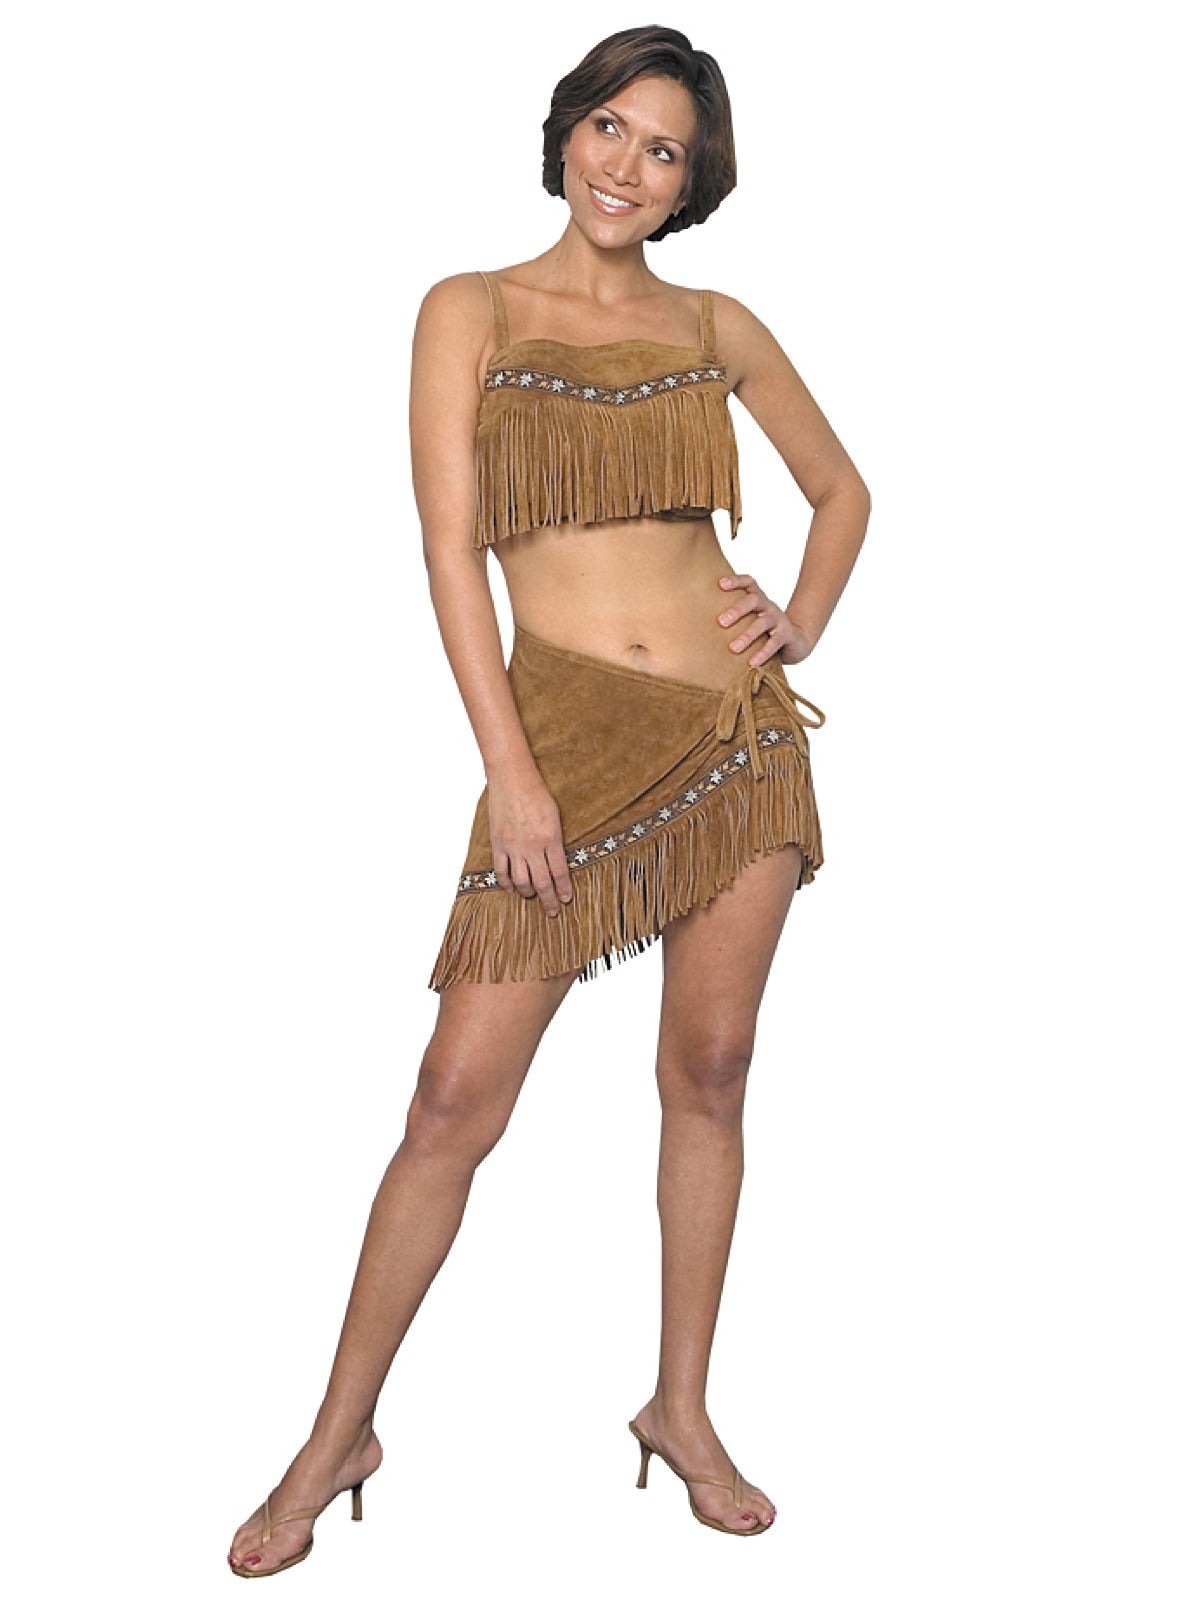 Hobbypos Little Fawn Indian Pocahontas Native American Deluxe Leather Women Costume